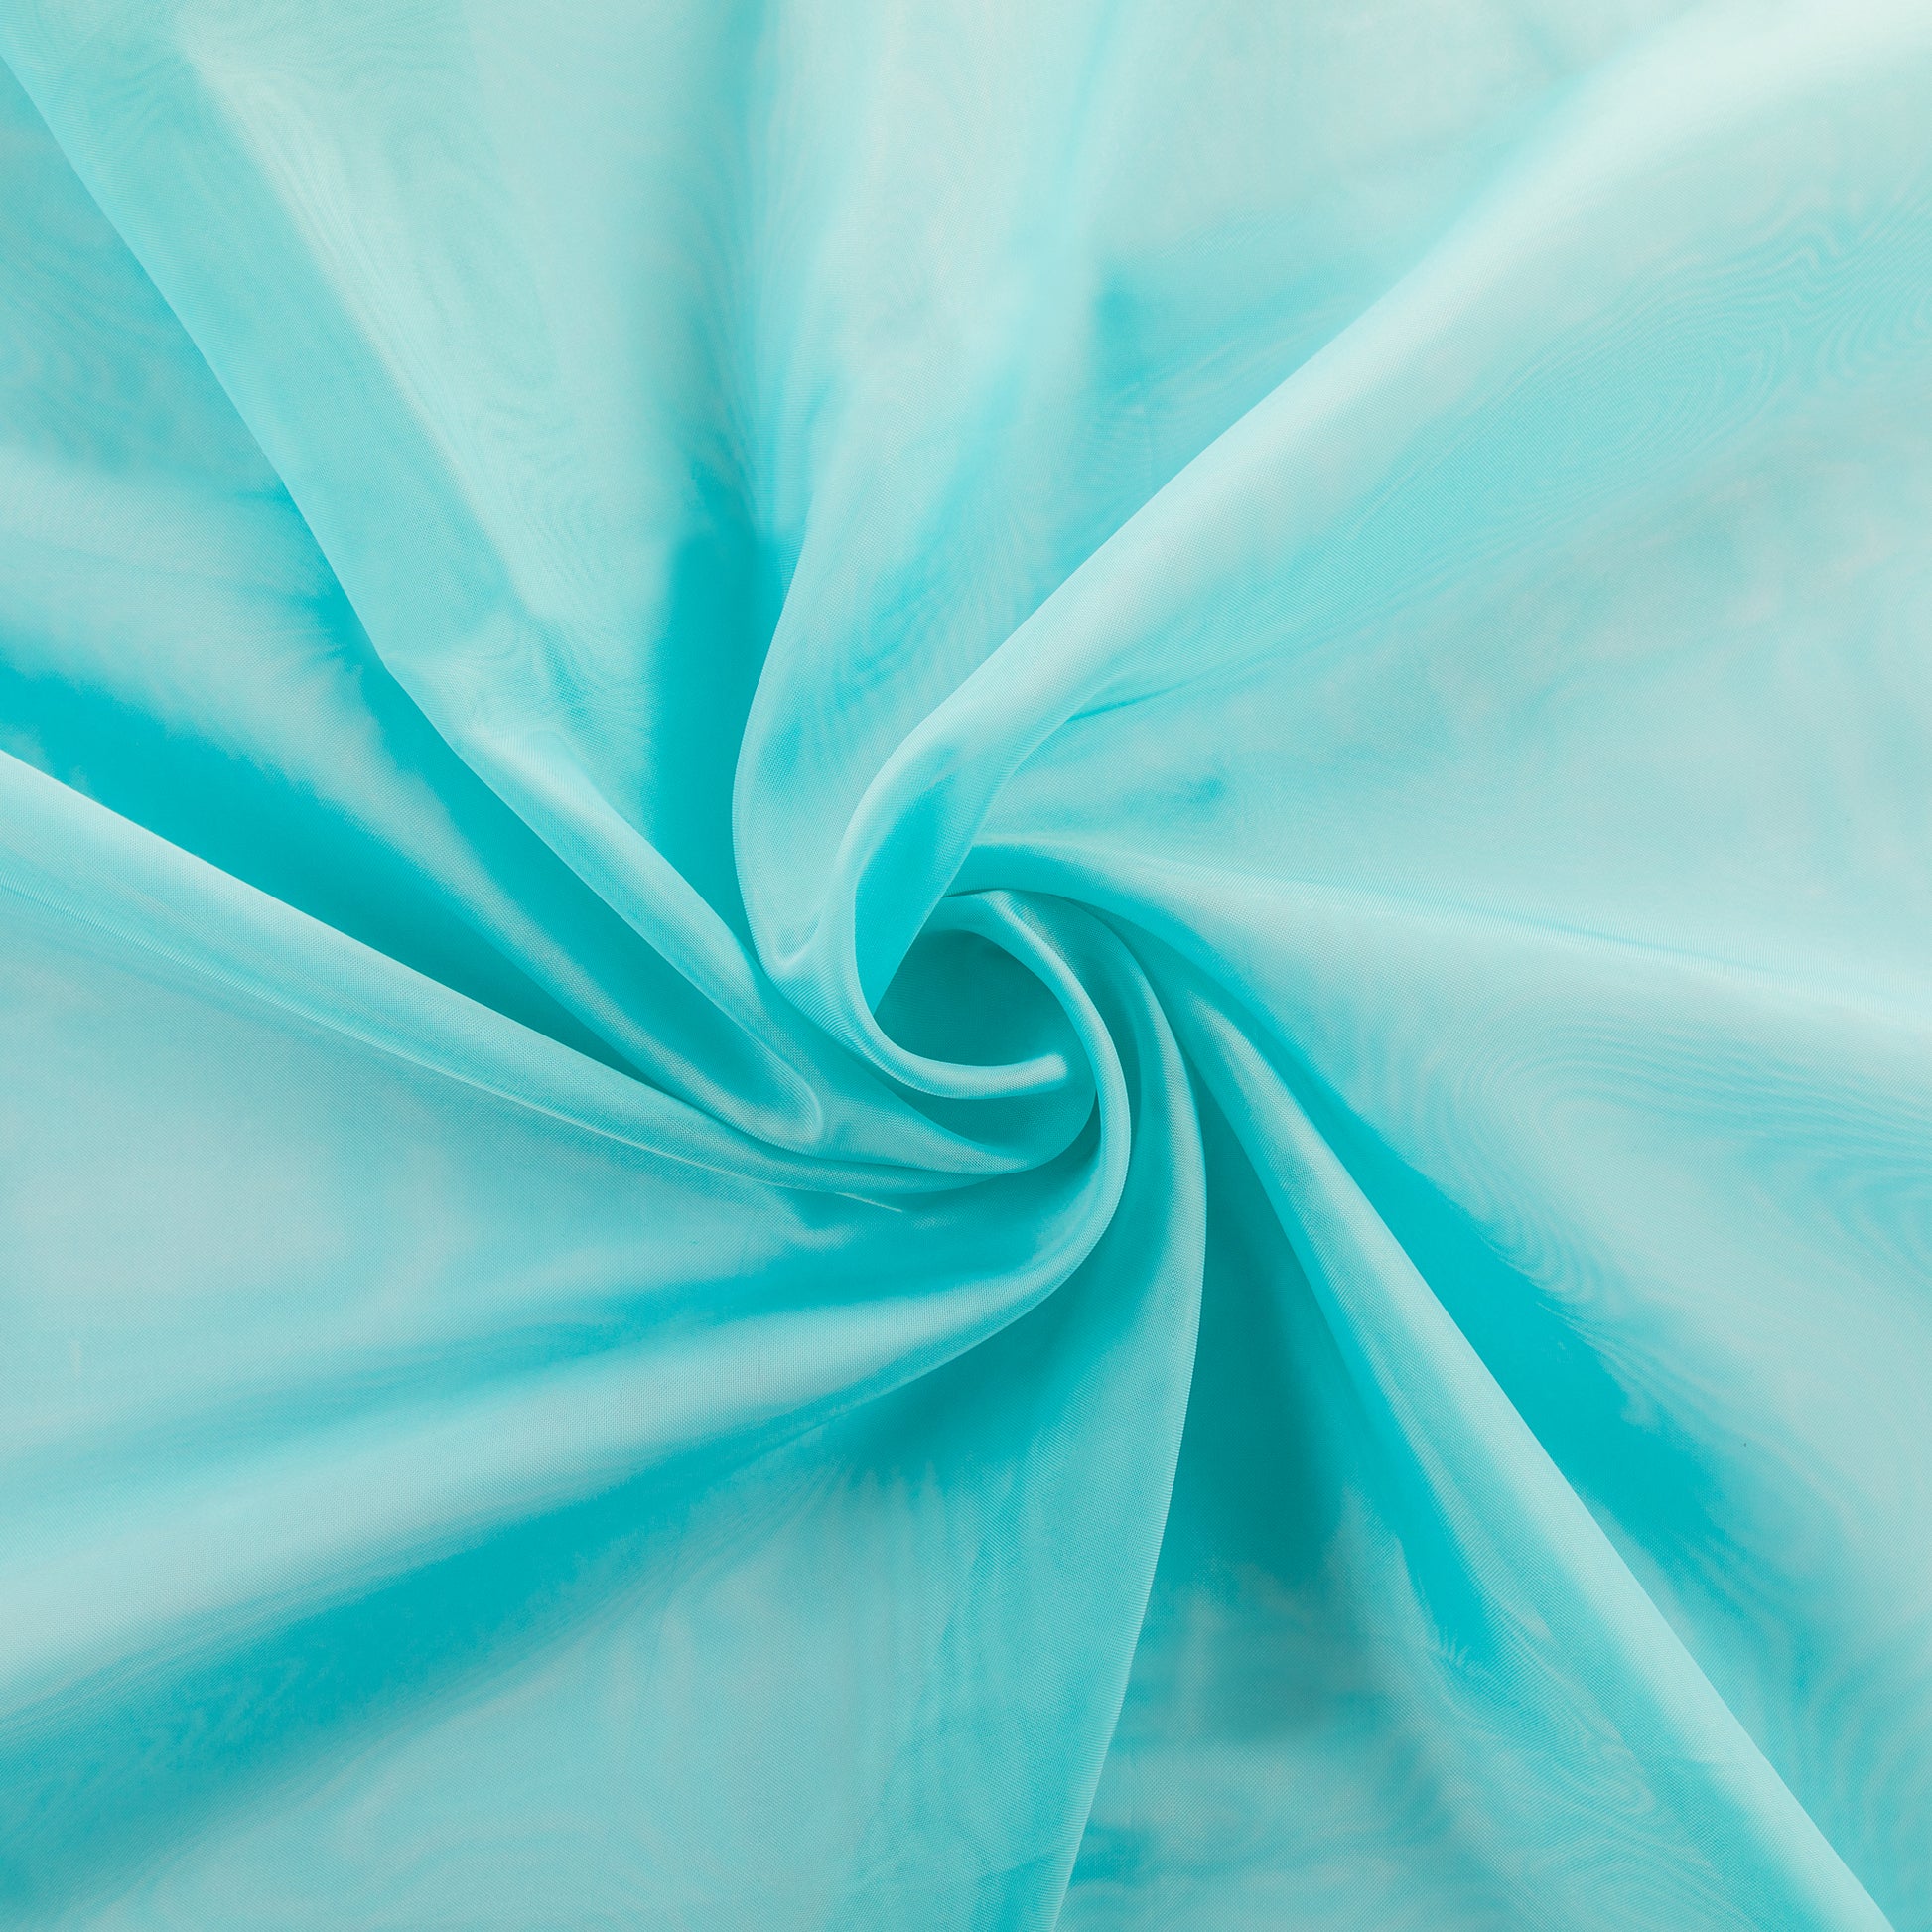 10 yards x 118" Flame Retardant (FR) Voile Sheer Fabric Roll/Bolt - Turquoise - CV Linens